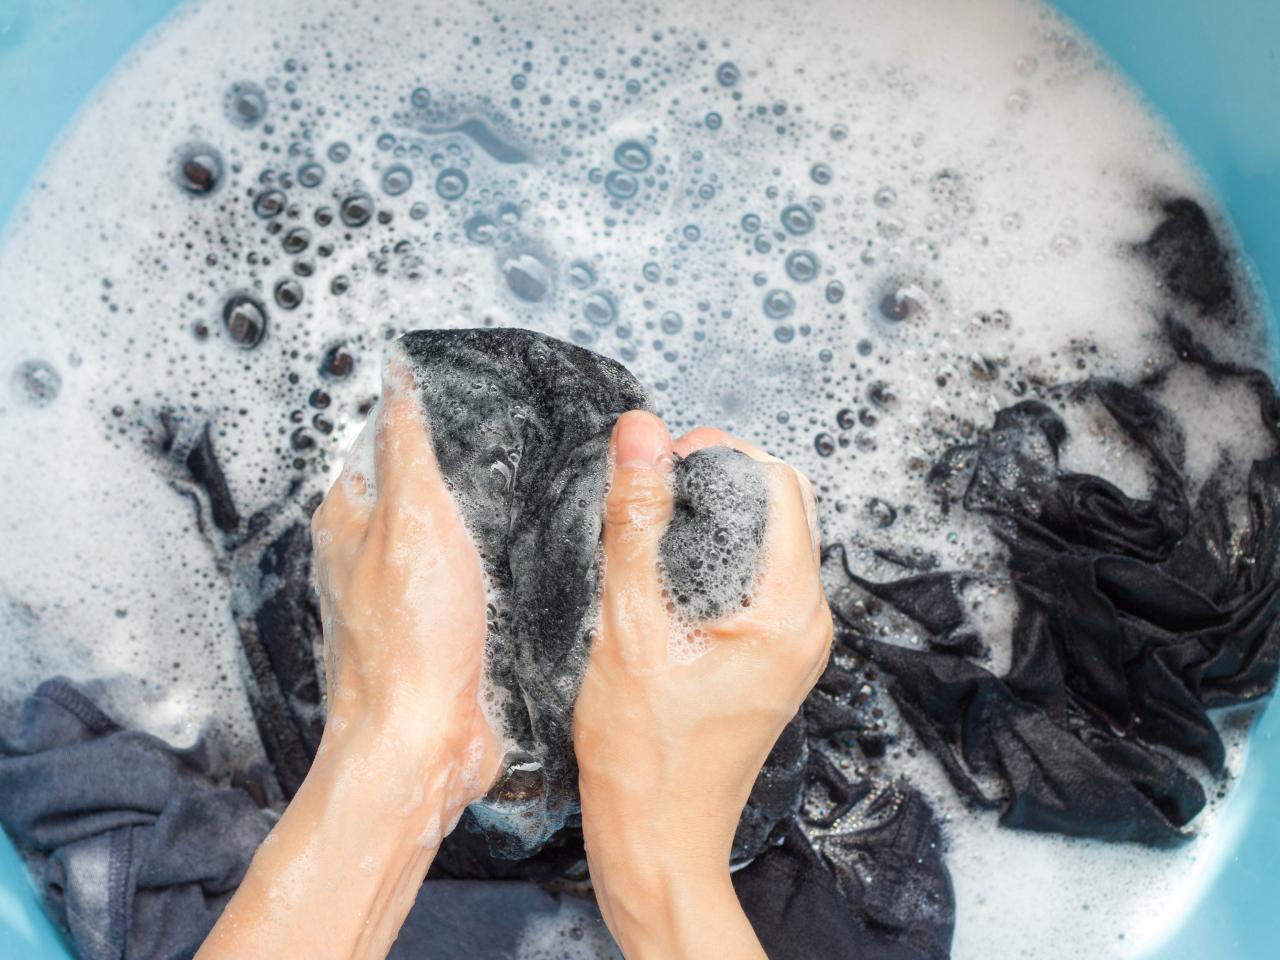 Stock Pictures: Washing clothes by hand